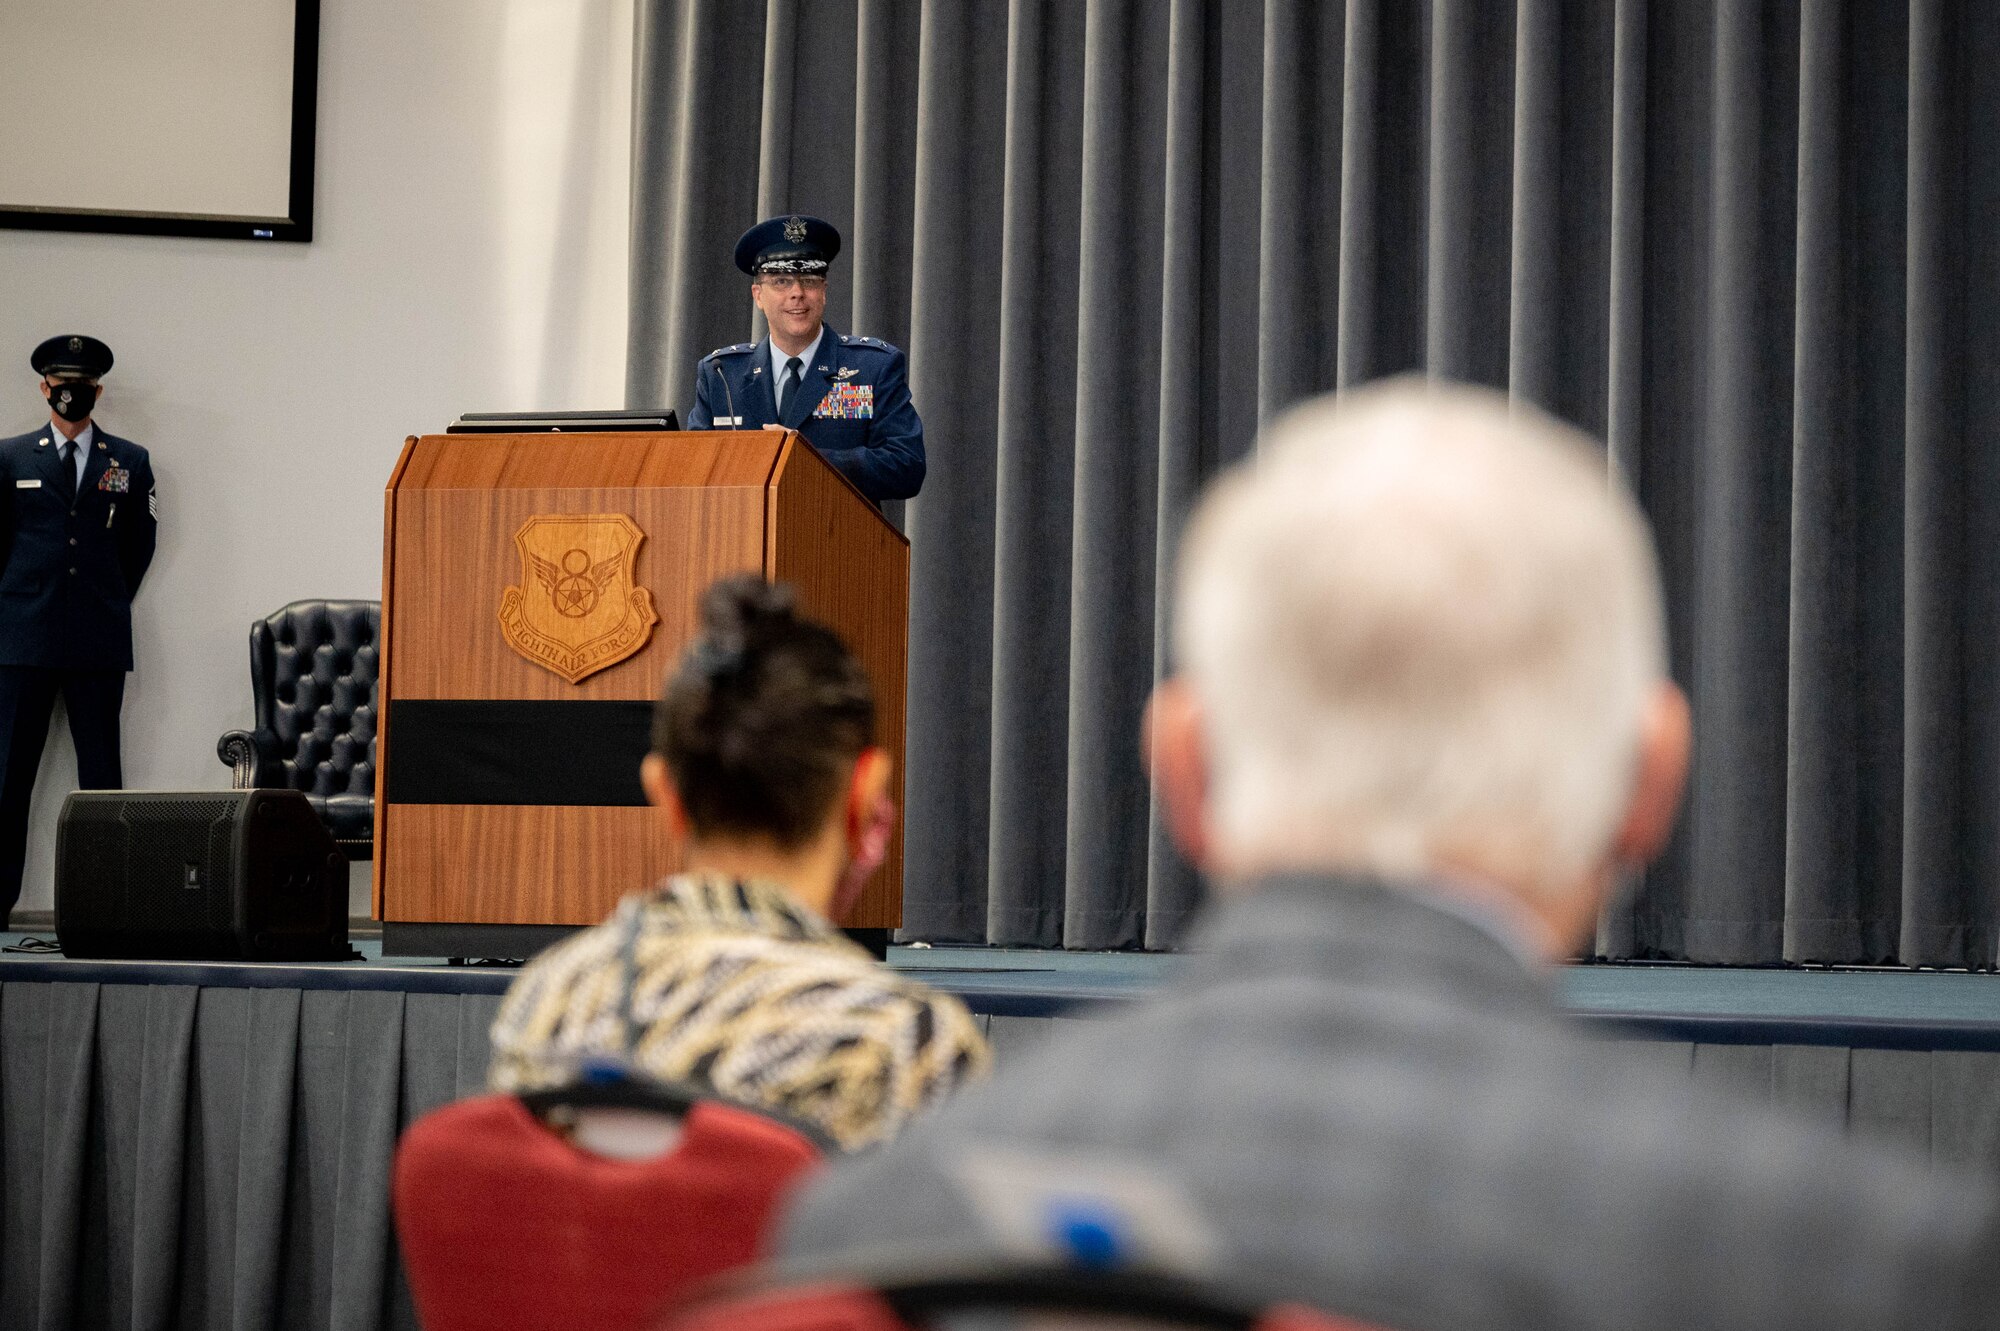 Maj. Gen. Andrew Gebara, incoming 8th Air Force and Joint-Global Strike Operations Center commander, addresses the crowd during a change of command ceremony at Barksdale Air Force Base, La., August 16, 2021. A change of command is a military tradition that represents a formal transfer of authority and responsibility for a unit from one commanding or flag officer to another. (U.S. Air Force photo by Staff Sgt. Bria Hughes)